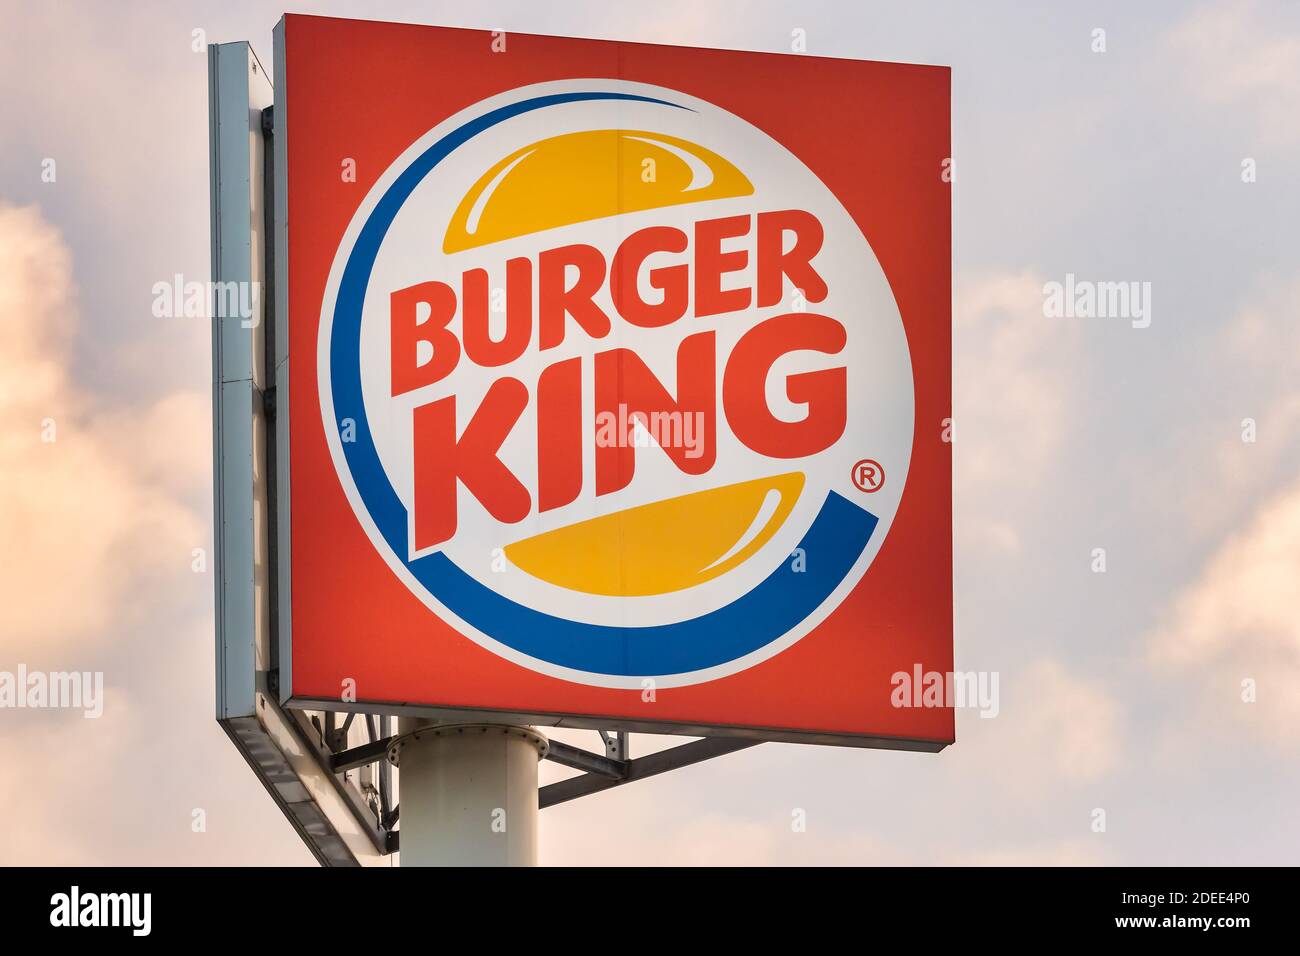 Rotterdam, The Netherlands - January 19, 2020:  Highway advertisement sign for Burger King during sunset in Rotterdam, The Netherlands Stock Photo